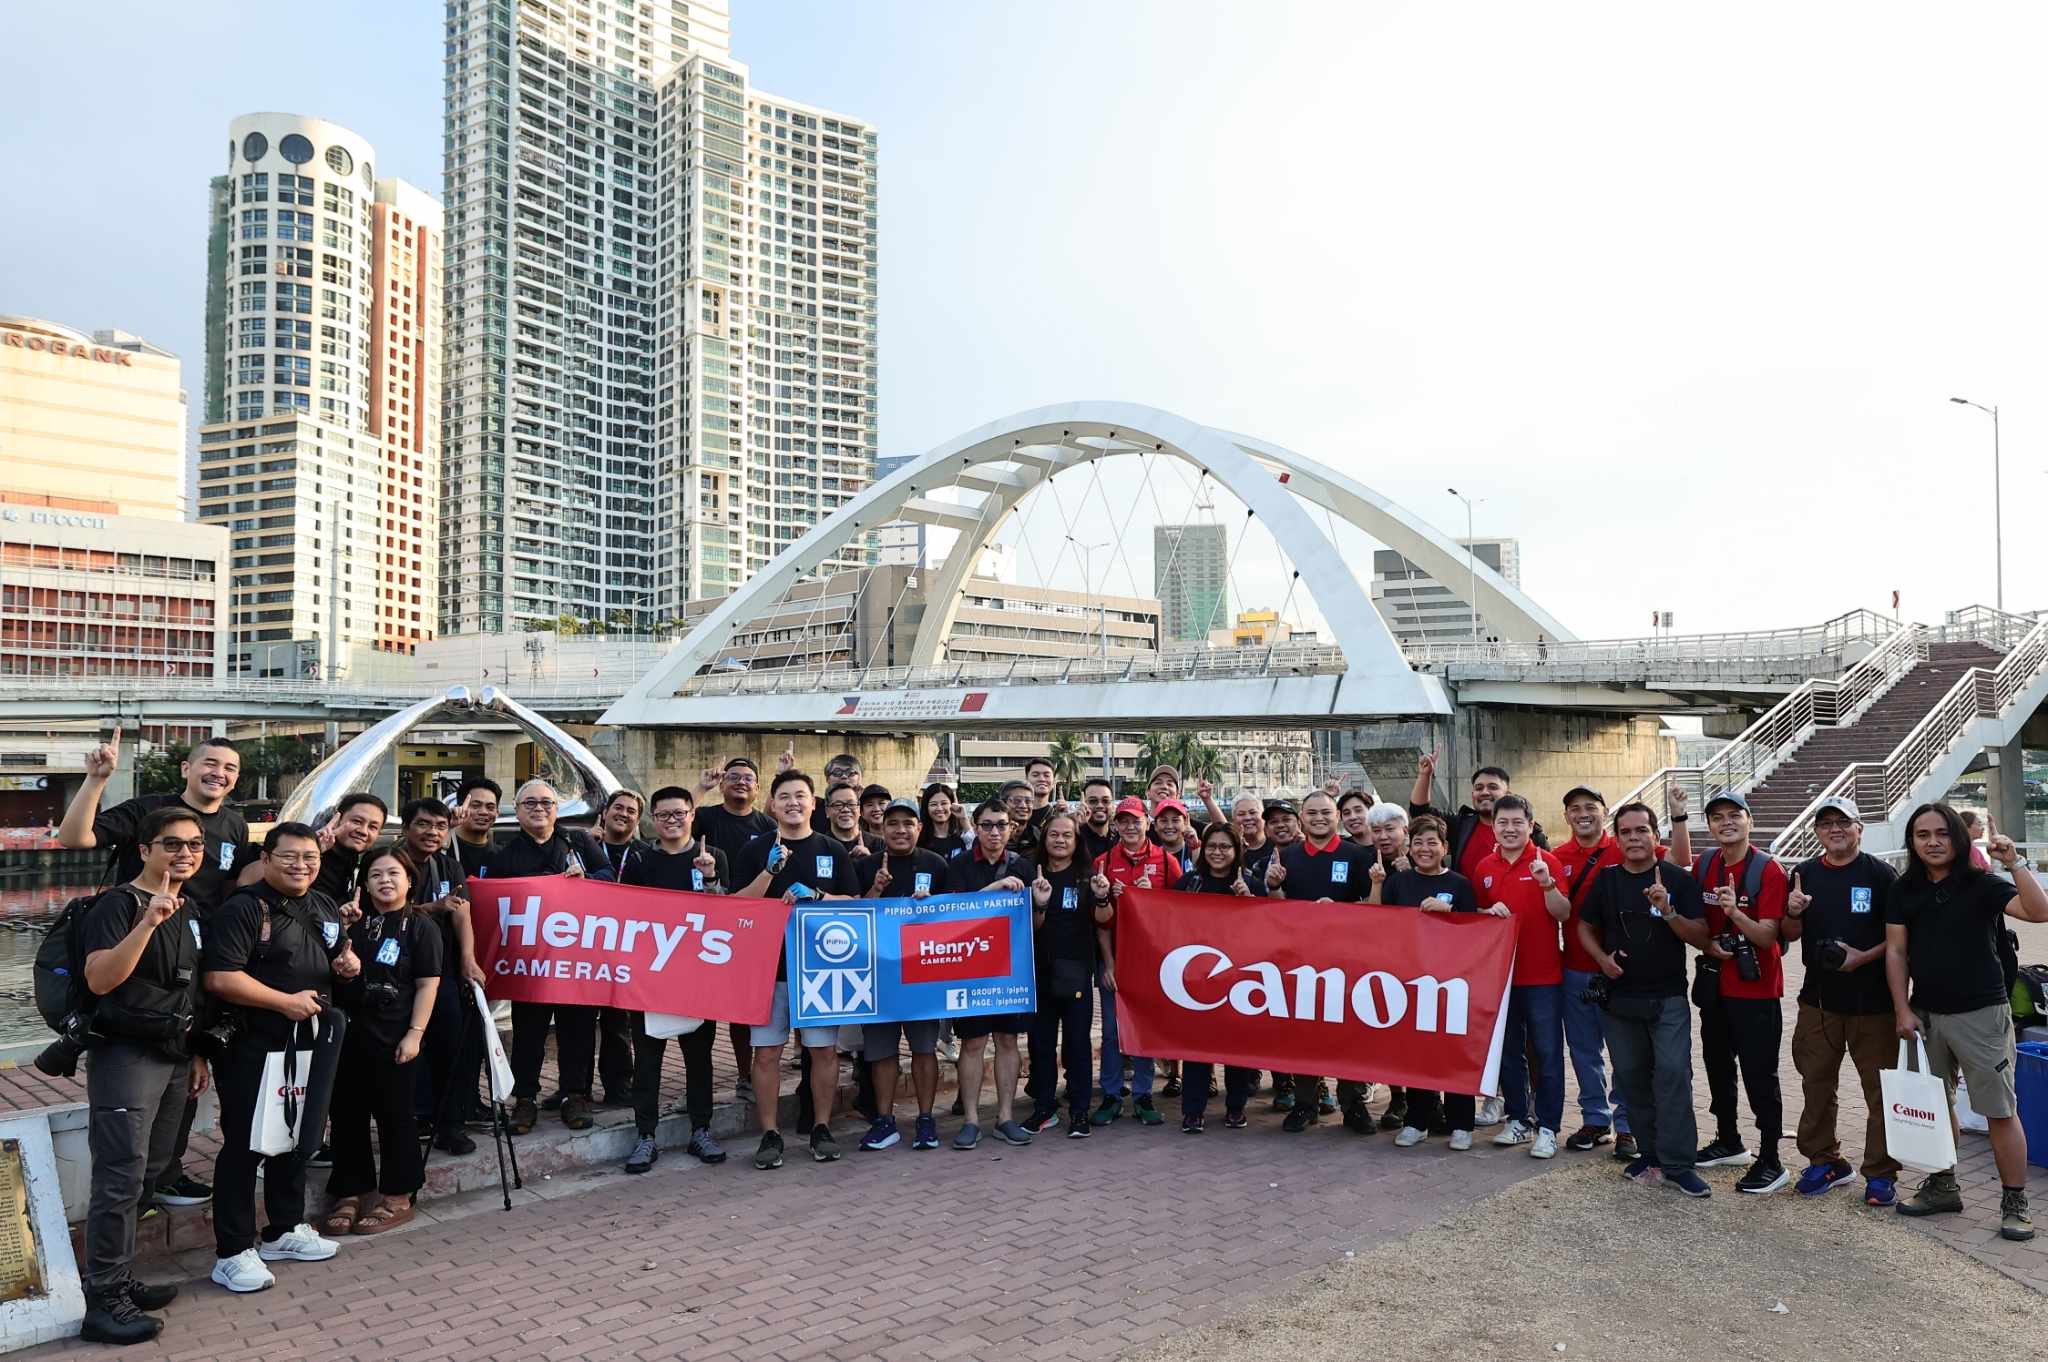 Canon PH Partners with PiPho and Henry’s Cameras for Chinese New Year Photo Walk